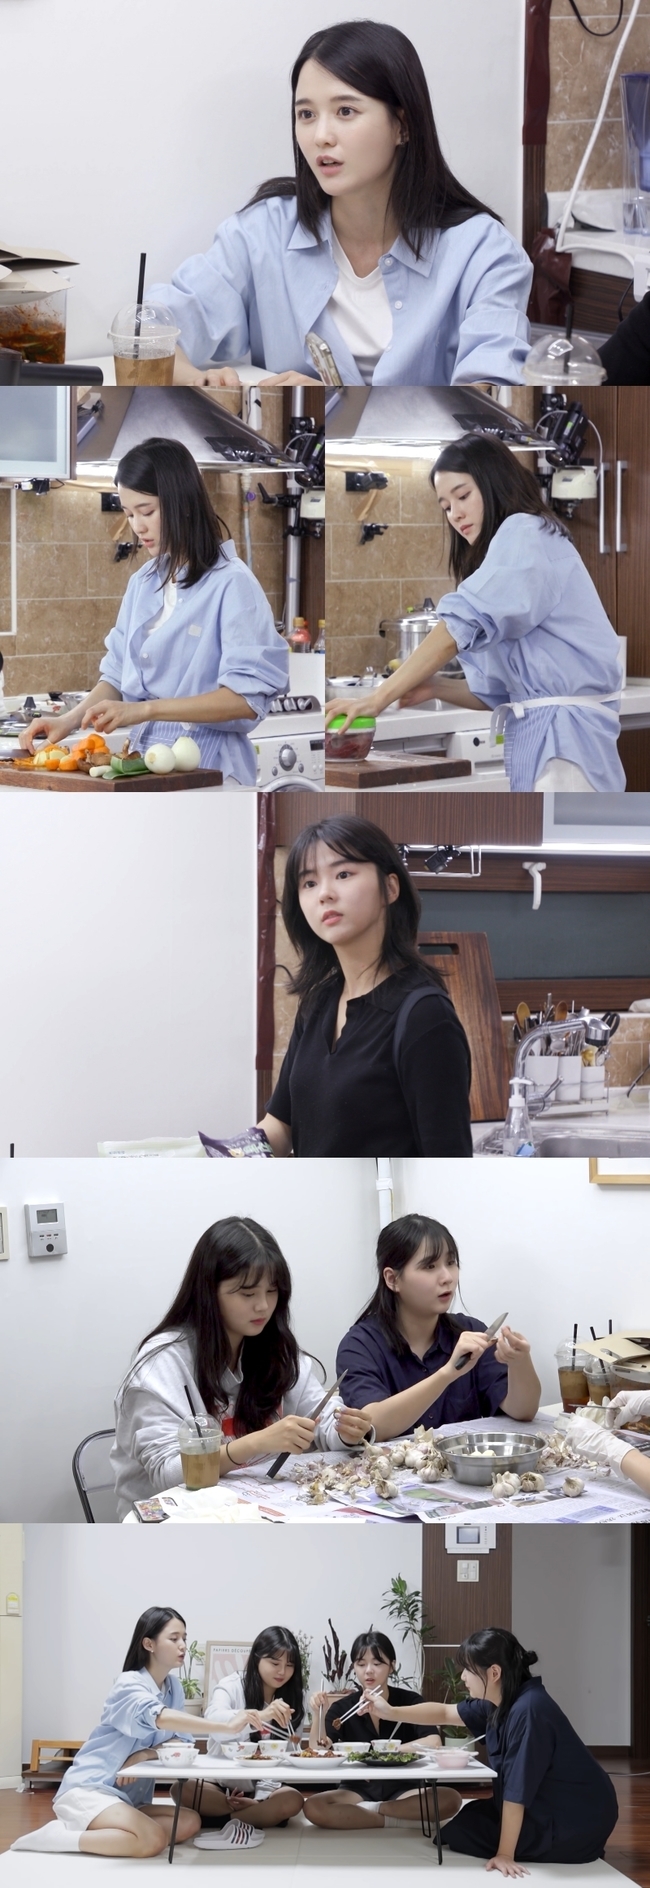 Actress Nam Bo-ras adorable bros are revealed on airOn September 29, at 5 pm, KBS 2TV  ⁇  Stars Top Recipe at Fun-Staurant  ⁇  ( ⁇  Stars Top Recipe at Fun-Staurant  ⁇ ) Nam Bo-ra, the eldest daughter of 13 brothers and sisters, I challenge to make food.In this process, brothers who resemble Nam Bo-ra are also revealed.Nam Bo-ra, a happy and happy K- eldest daughter, is expected to enrich the audiences audience in front of the TV.Nam Bo-ra in the VCR, which was unveiled on the day, took out a large size basin and made a 1kg side dish. ⁇  Stars Top Recipe at Fun-Staurant  ⁇  The family members were amazed at the enormous capacity of Nam Bo-ras cooking skills, which soaked directly into the pork kimchi.In addition, Nam Bo-ra also unveiled a special pork kimchi ingredient that contains the secrets of the house.After Nam Bo-ra finished cooking, the doorbell rang, and three women who looked exactly like Nam Bo-ra came in and focused attention.These were the 7th Sebin, 9th Semino Rossi, and 10th Sora of the Nam Bo-ra brothers who appeared with Nam Bo-ra in the past KBS 1TV  ⁇  Human Theater  ⁇ .When the brothers came, Nam Bo-ra smiled.Above all, it was the sisters of Nam Bo-ra who never stopped laughing. ⁇   ⁇   ⁇   ⁇   ⁇  Stars Top Recipe at Fun-Staurant  ⁇   ⁇  Remembering only the cute images of the children who were young at the time of the appearance of the human theater  ⁇   ⁇   ⁇  The family was really big  ⁇   ⁇   ⁇   ⁇ ,  ⁇   ⁇  I admired the same as Sister.On this day, Nam Bo-ra introduced one of the three brothers Sebin, Semino Rossi, and Sora, and poured out the praise of Brother Sister.In particular, Sebin, who is walking the actors path after Sister, said, I am a very smart person. He also worked hard at the university entrance examination by himself. He is a wonderful brother who pioneers his own way.I did not hesitate to praise him for his recent audition.On this day, Nam Bo-ras brothers prepare a special gift for Sister who always does her best for her family.It is the back door that the brothers shed Nam Bo-ra as well as Han Ji-hye who watched the VCR and Tears separately.